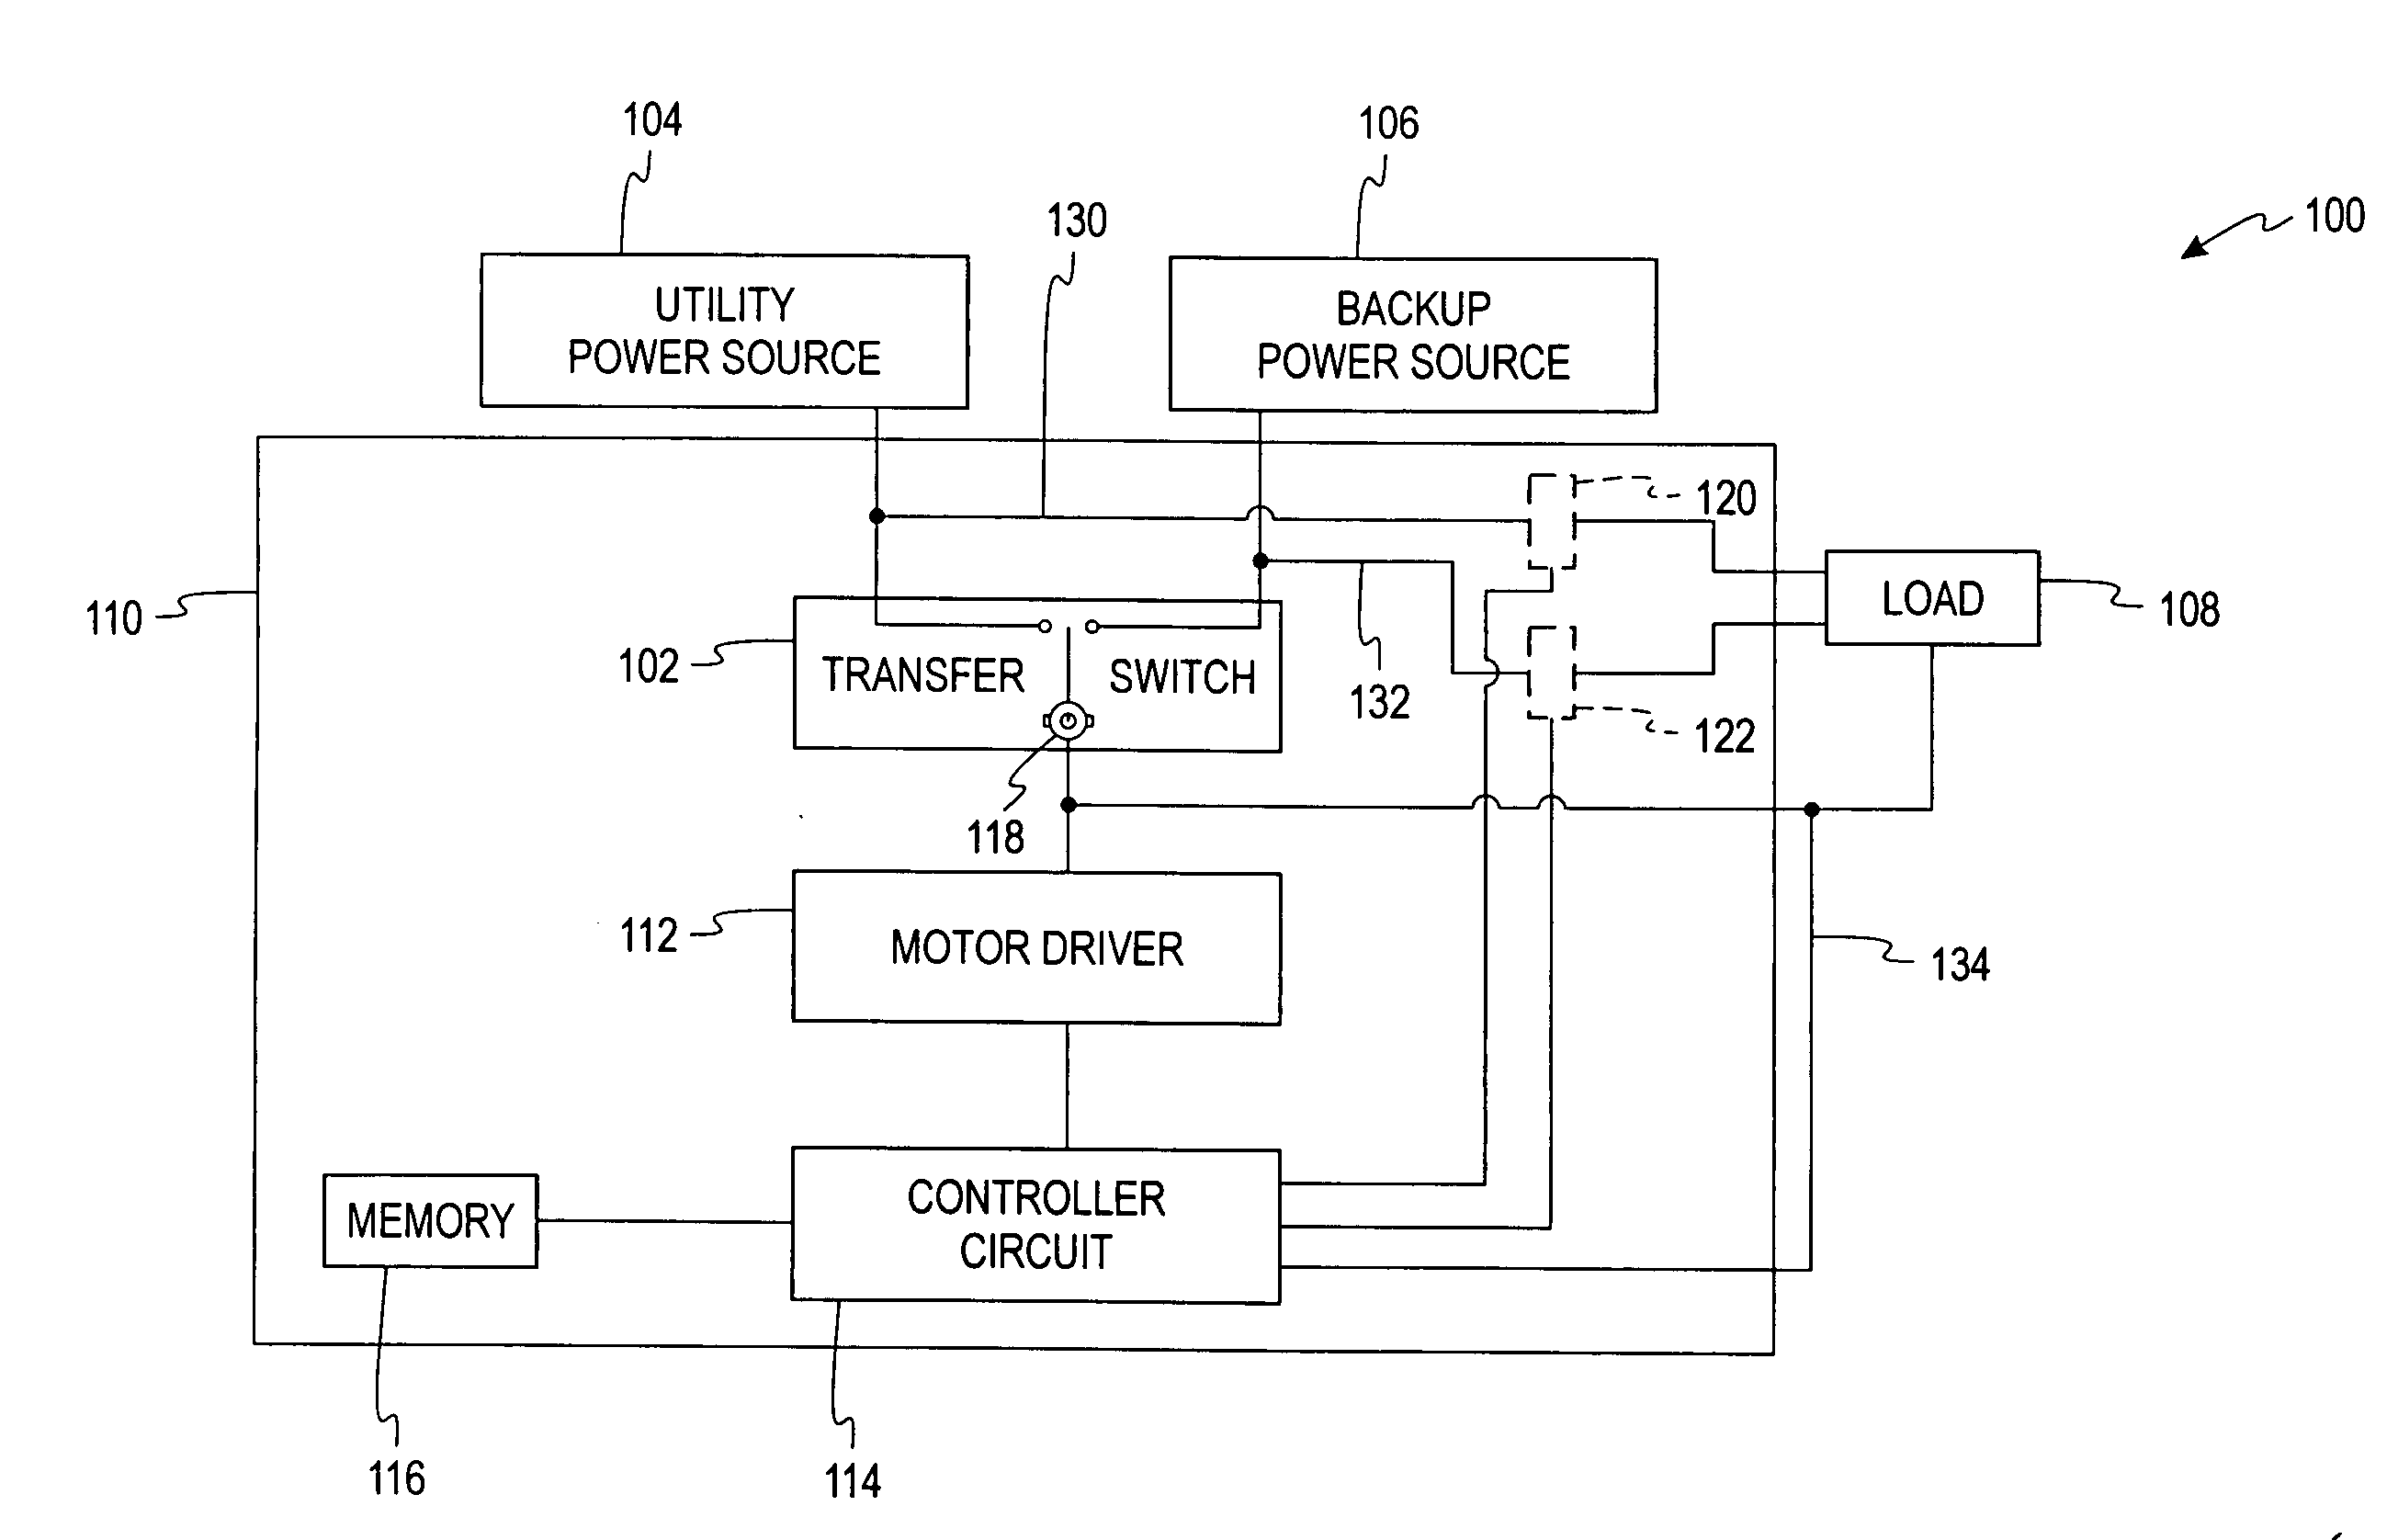 Contact verification method for a transfer switch mechanism